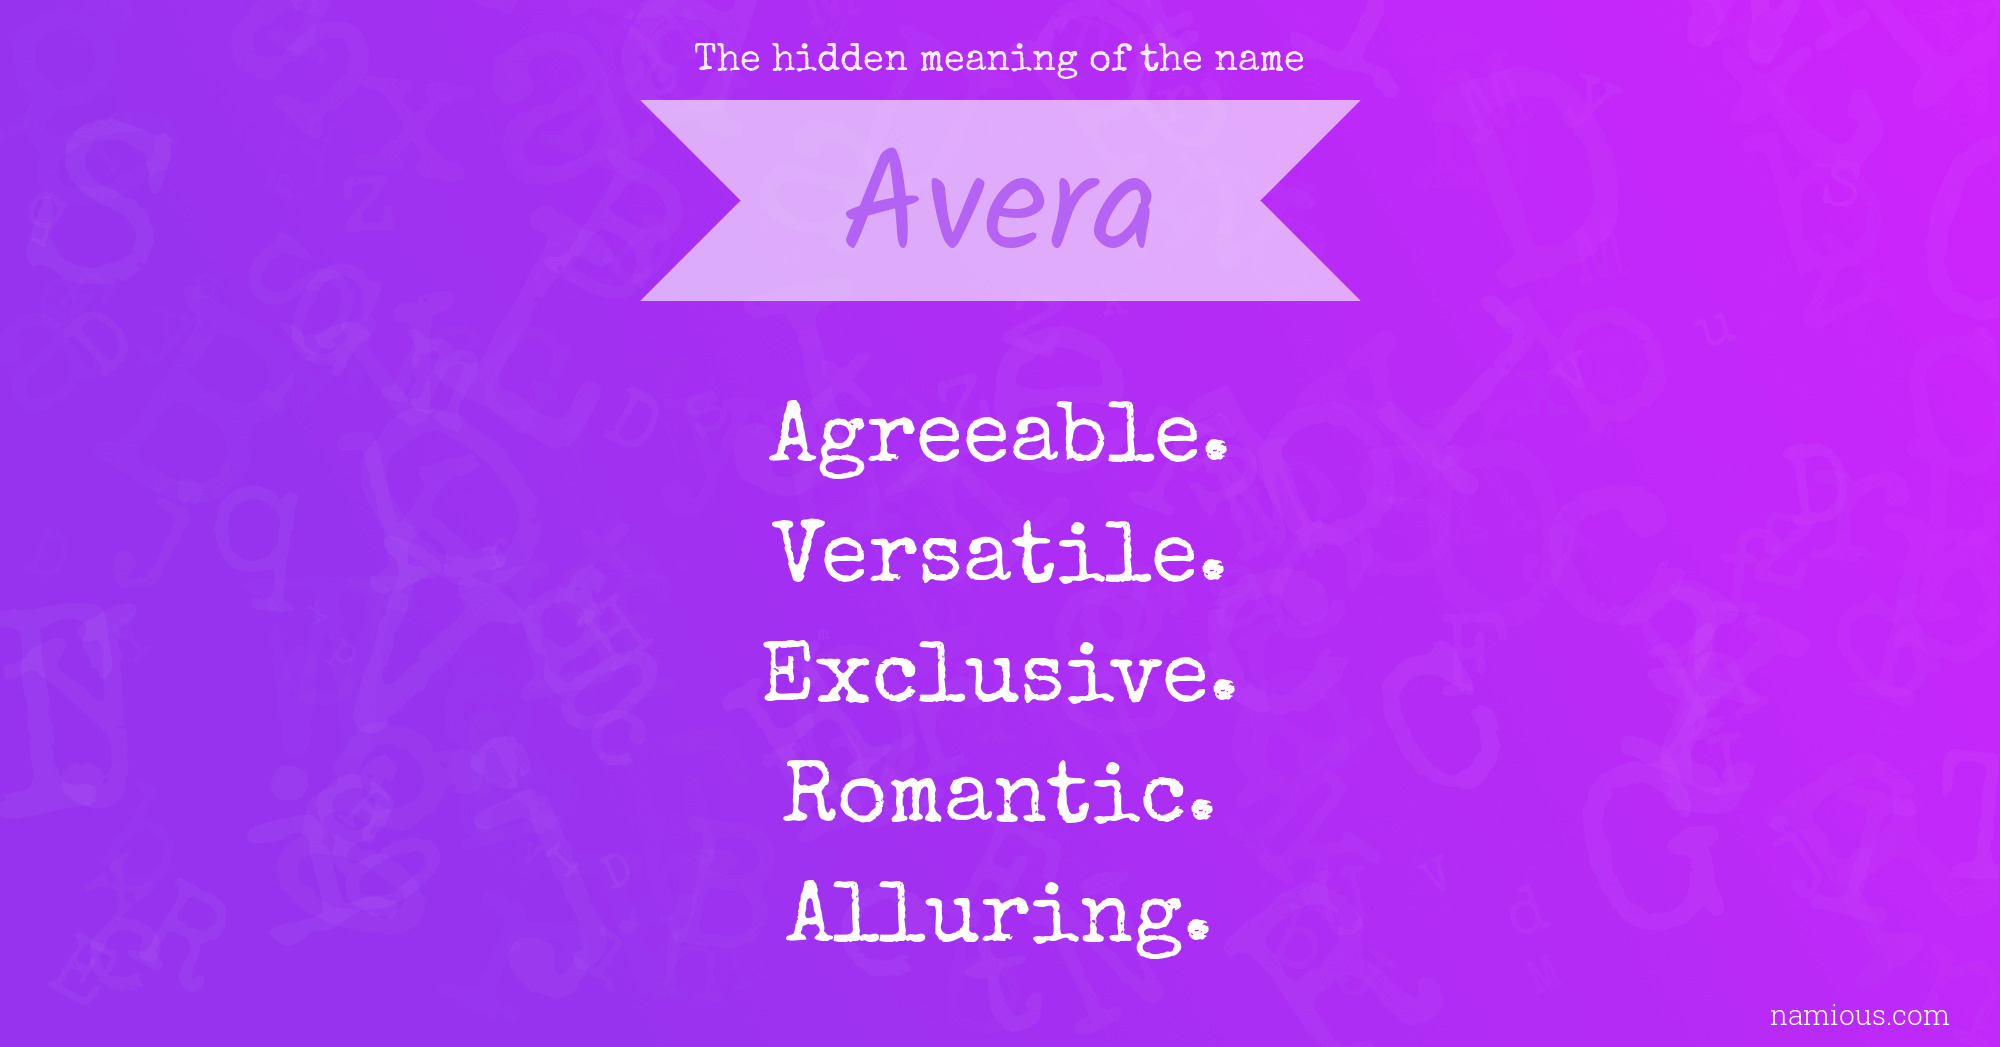 The hidden meaning of the name Avera